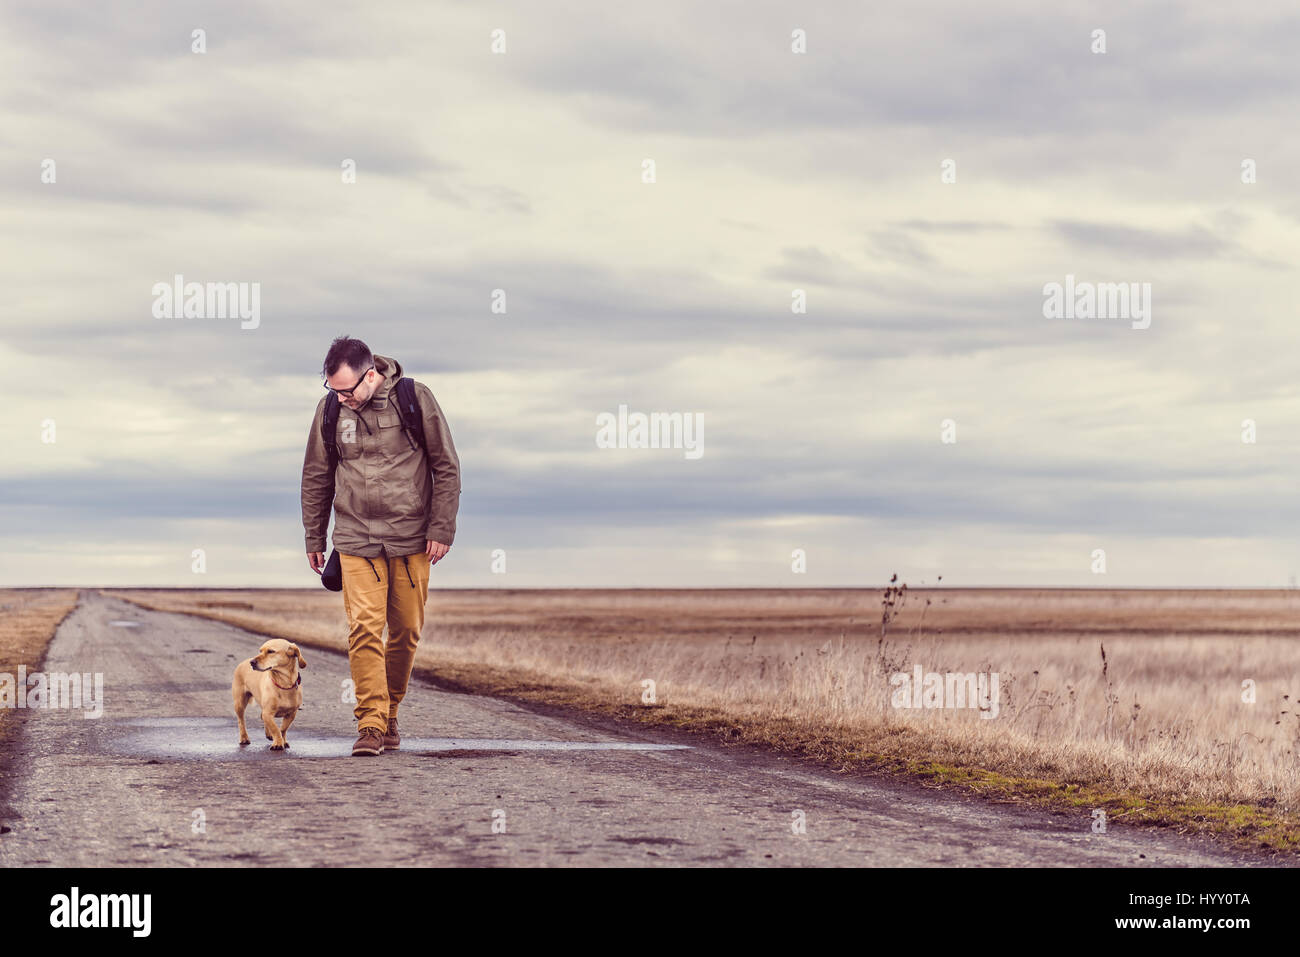 Hiker and dog walking down a road on a cloudy day Stock Photo